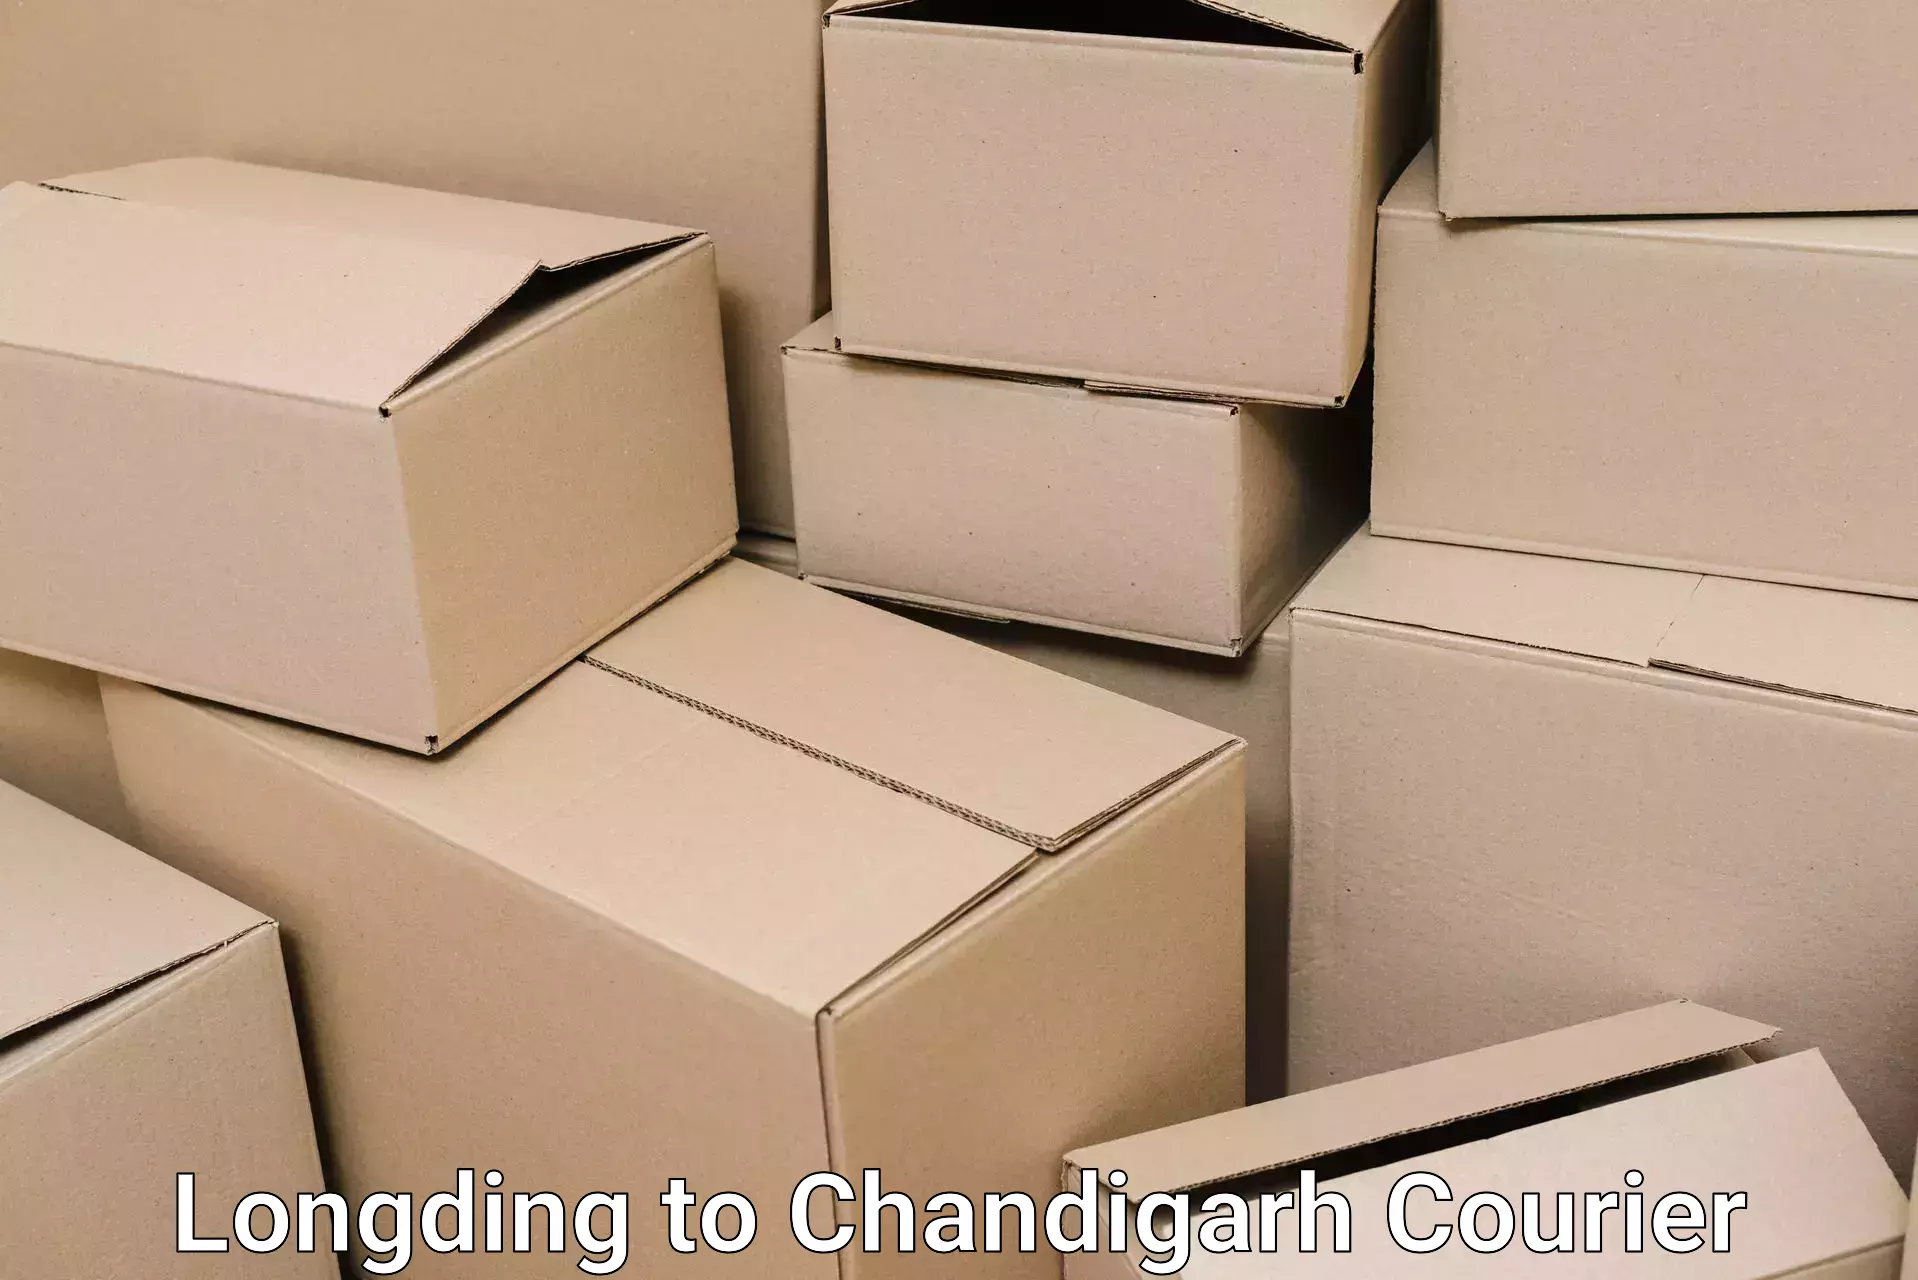 Furniture transport experts Longding to Chandigarh